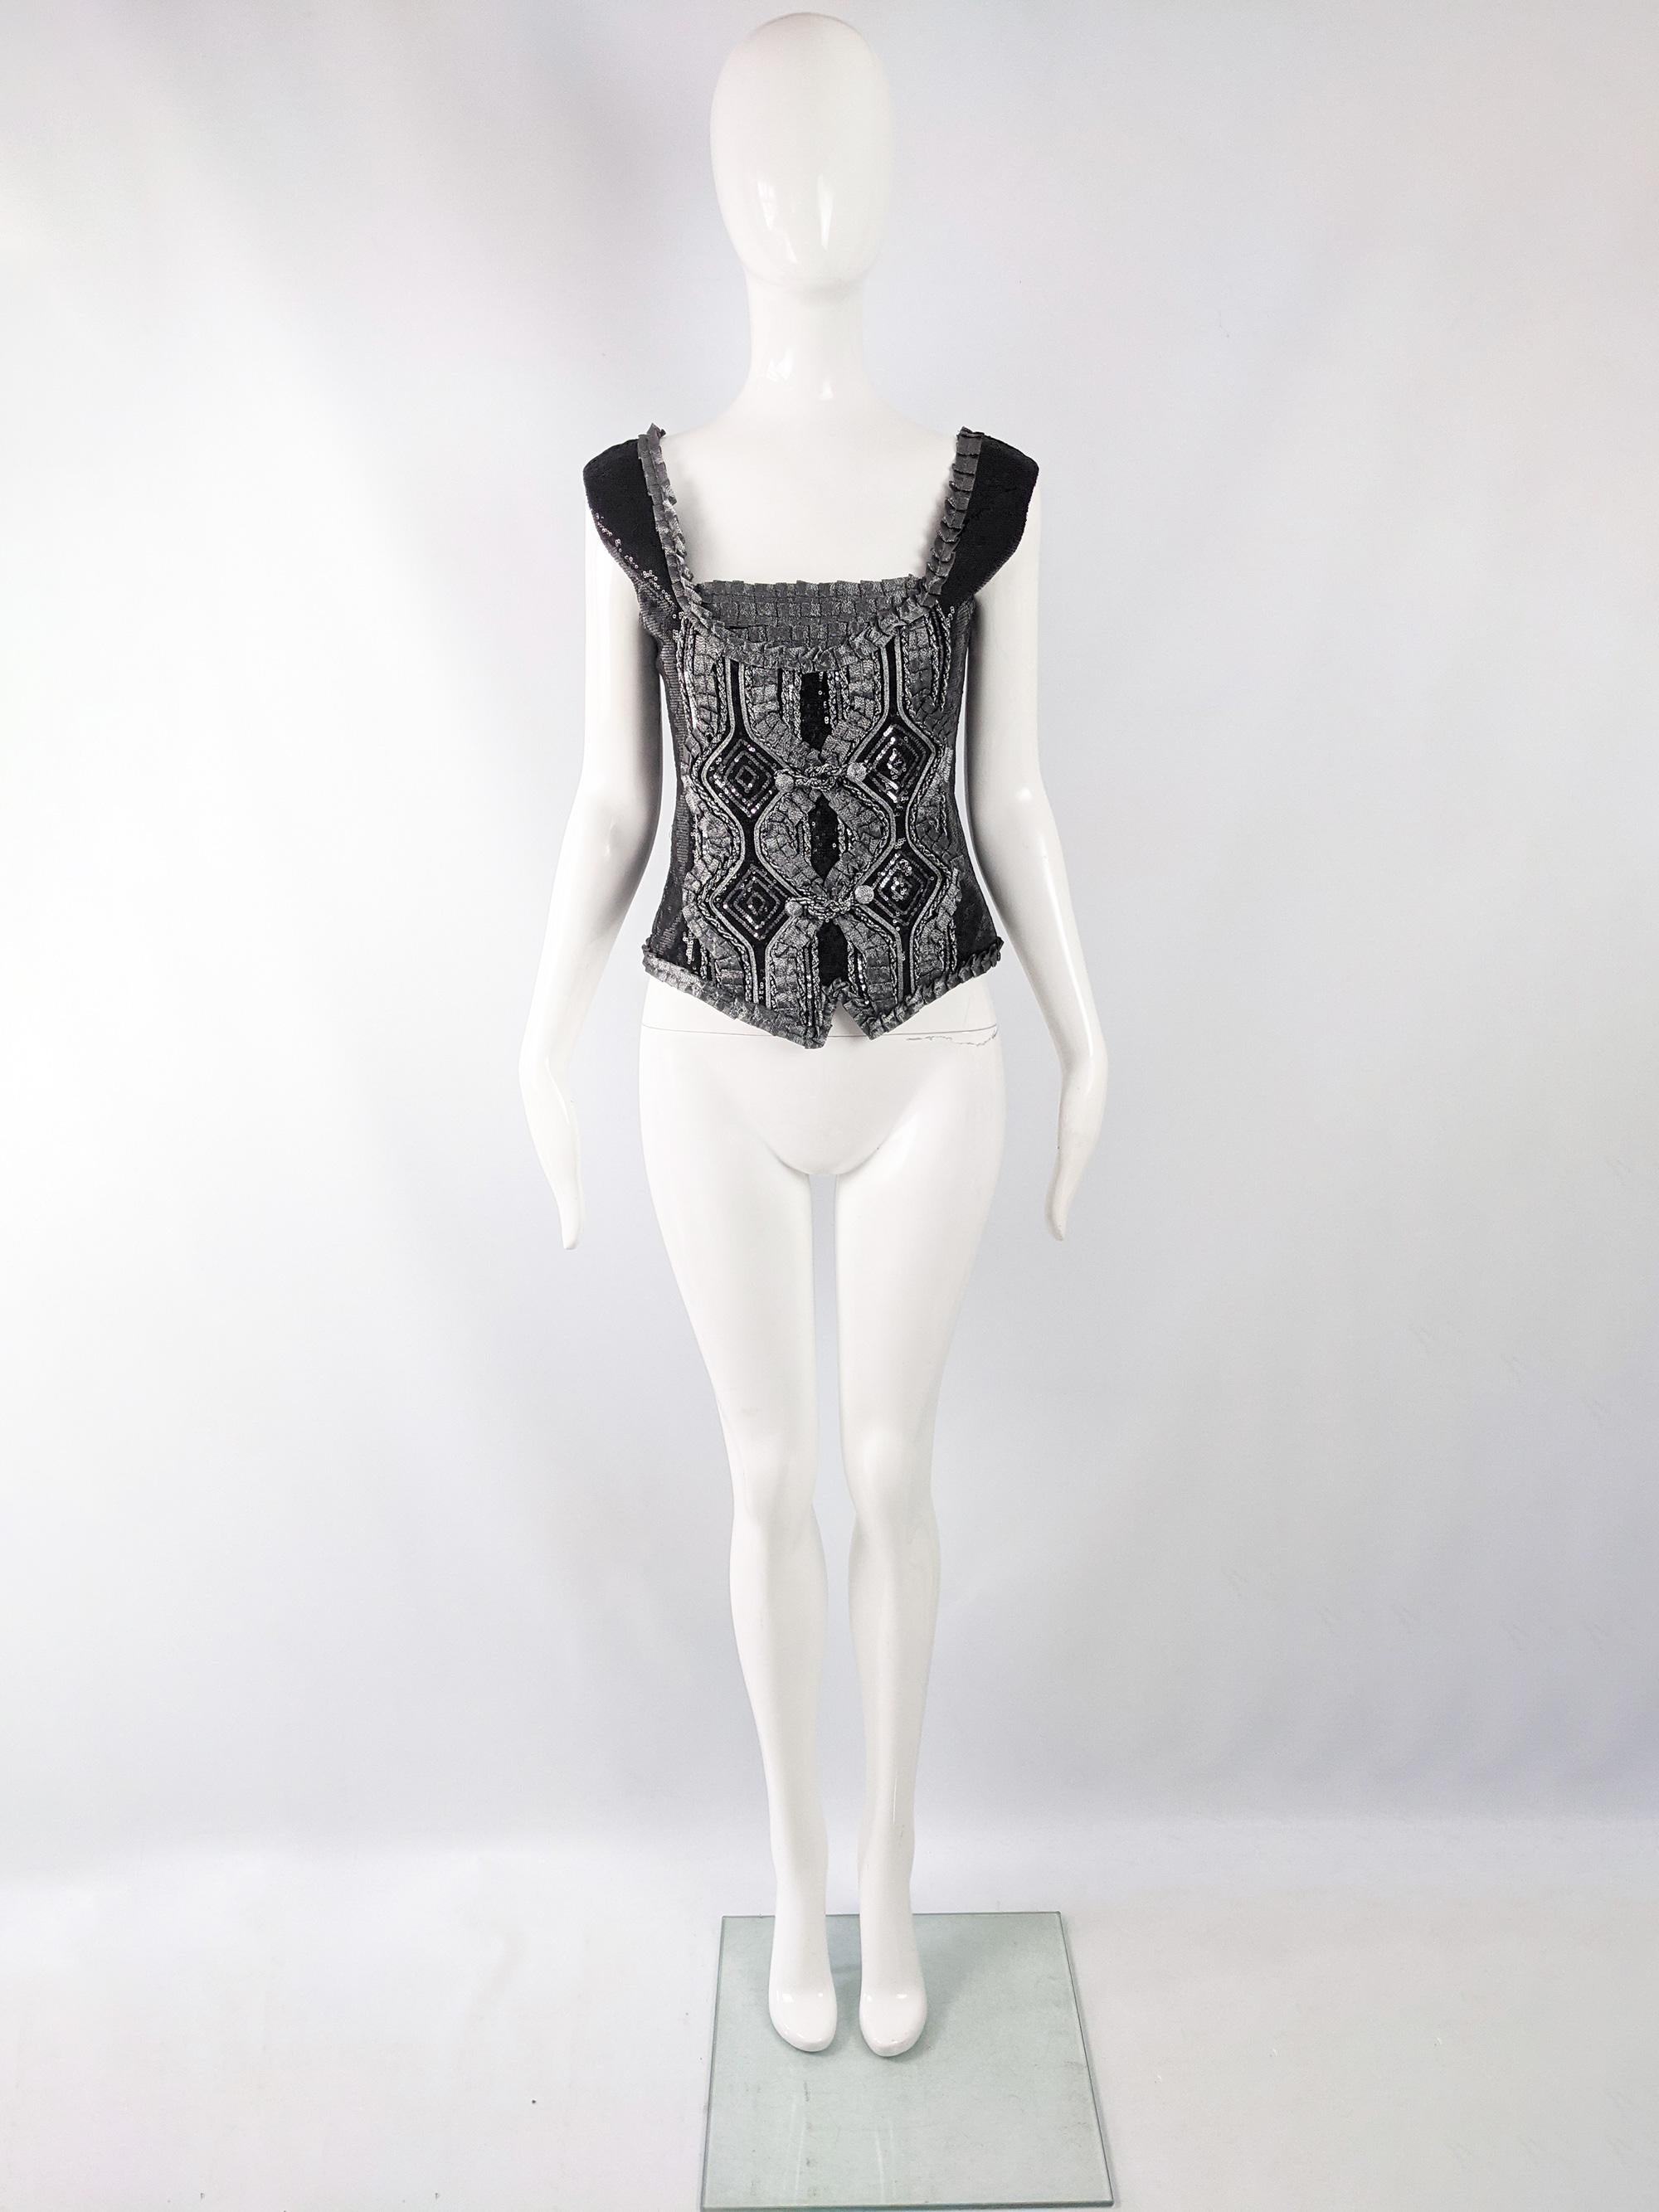 A fabulous vintage Roccobarocco womens sequinned sleeveless top from the early 2000s, perfect for a party. Made in Italy with handmade embroidery and silver ribbon appliqúes. 

Size: Marked vintage IT 48 / 34” but measures more like a modern UK 10/